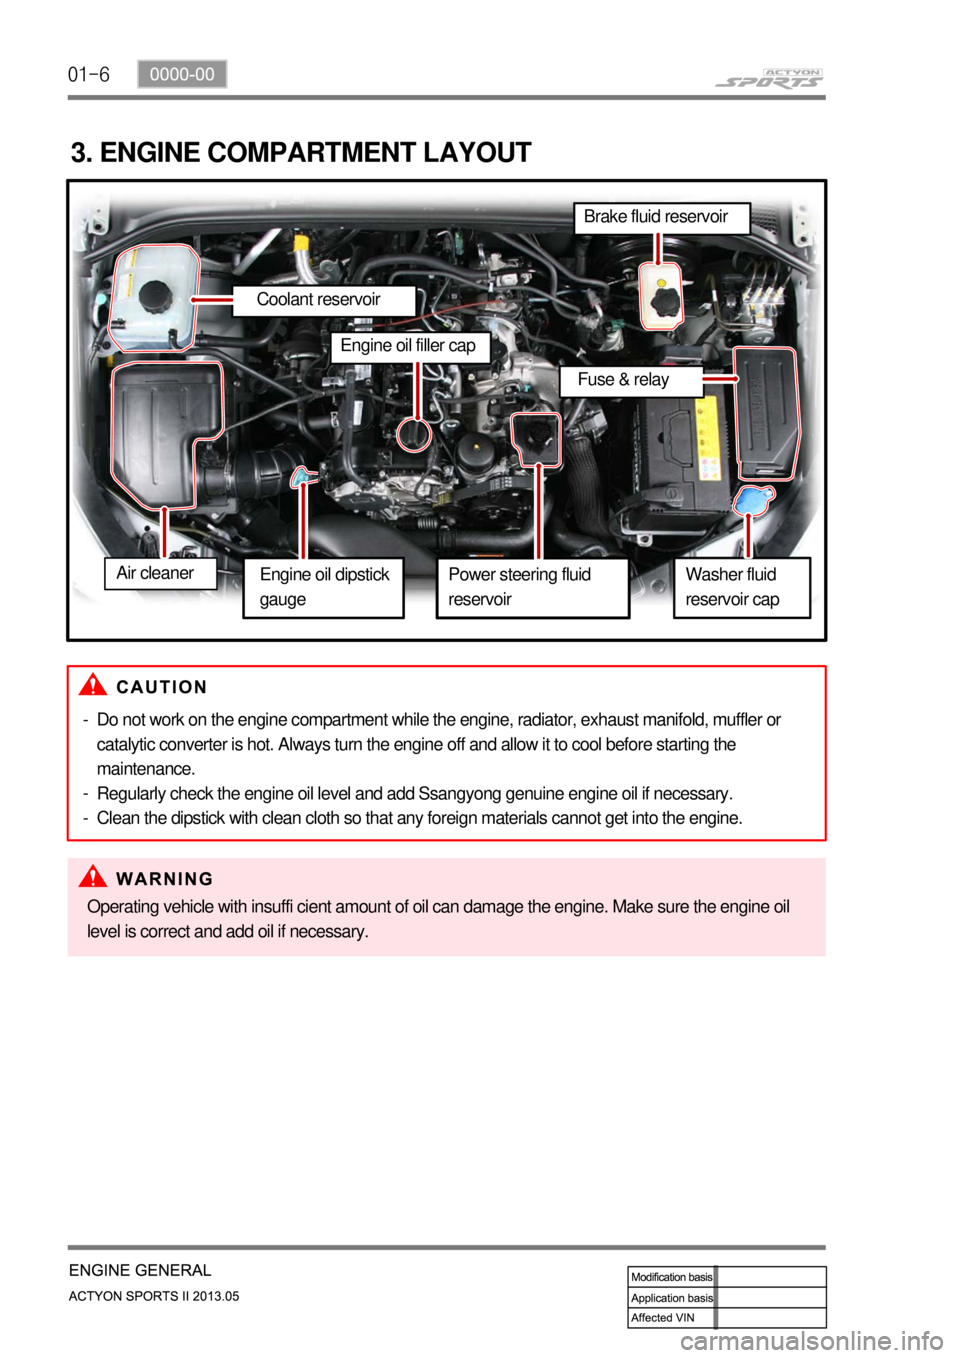 SSANGYONG NEW ACTYON SPORTS 2013 Owners Manual 01-6
3. ENGINE COMPARTMENT LAYOUT
Do not work on the engine compartment while the engine, radiator, exhaust manifold, muffler or 
catalytic converter is hot. Always turn the engine off and allow it to